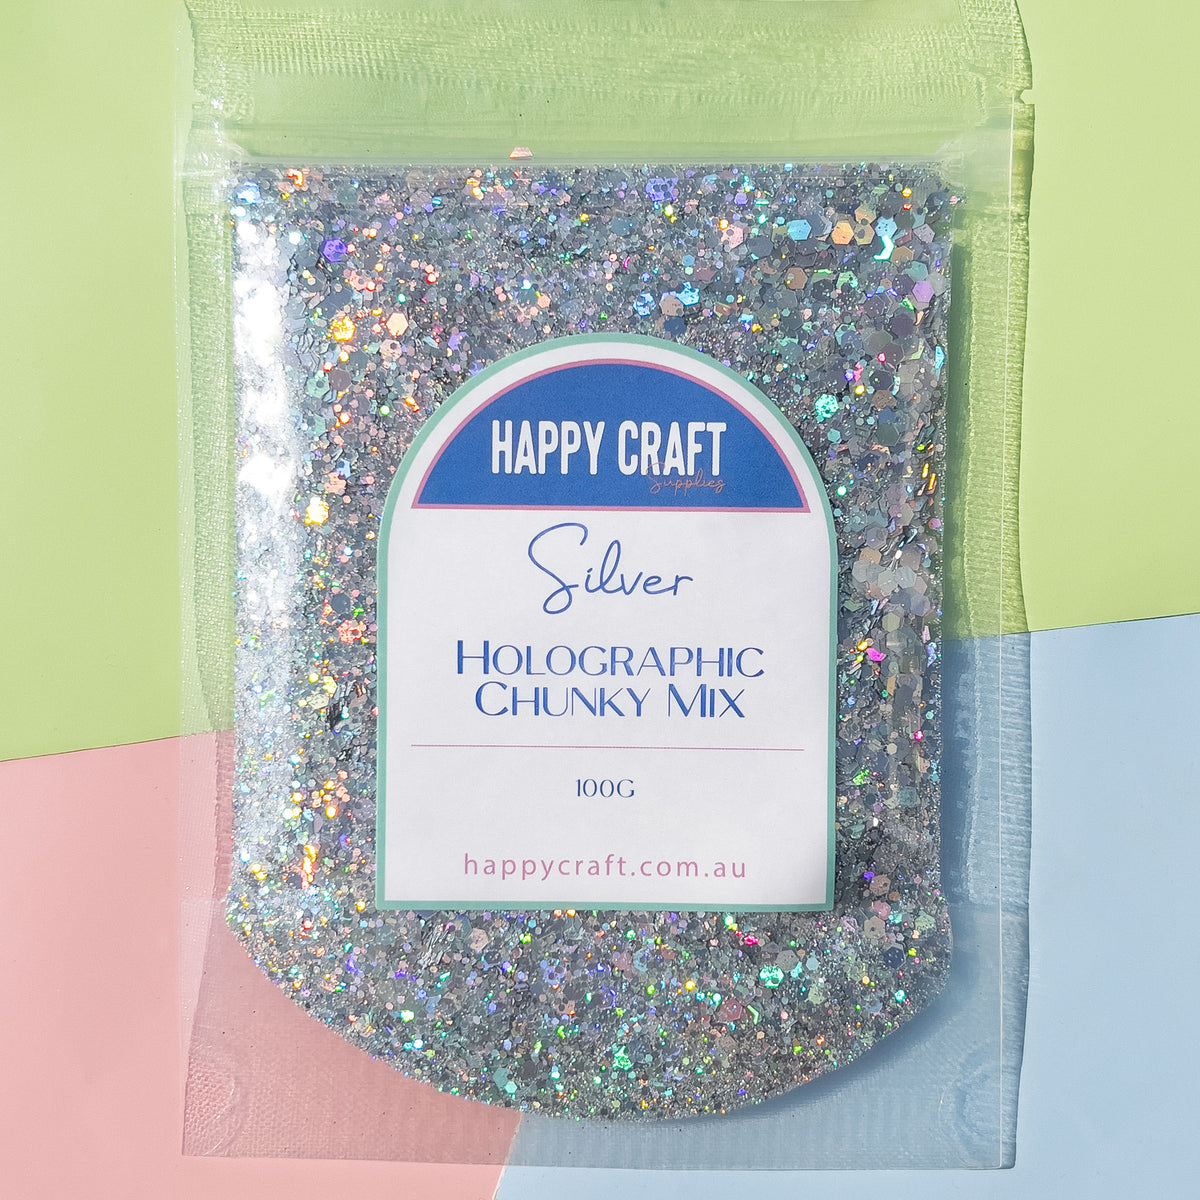 Chunky Glitter Mix Holographic - Silver